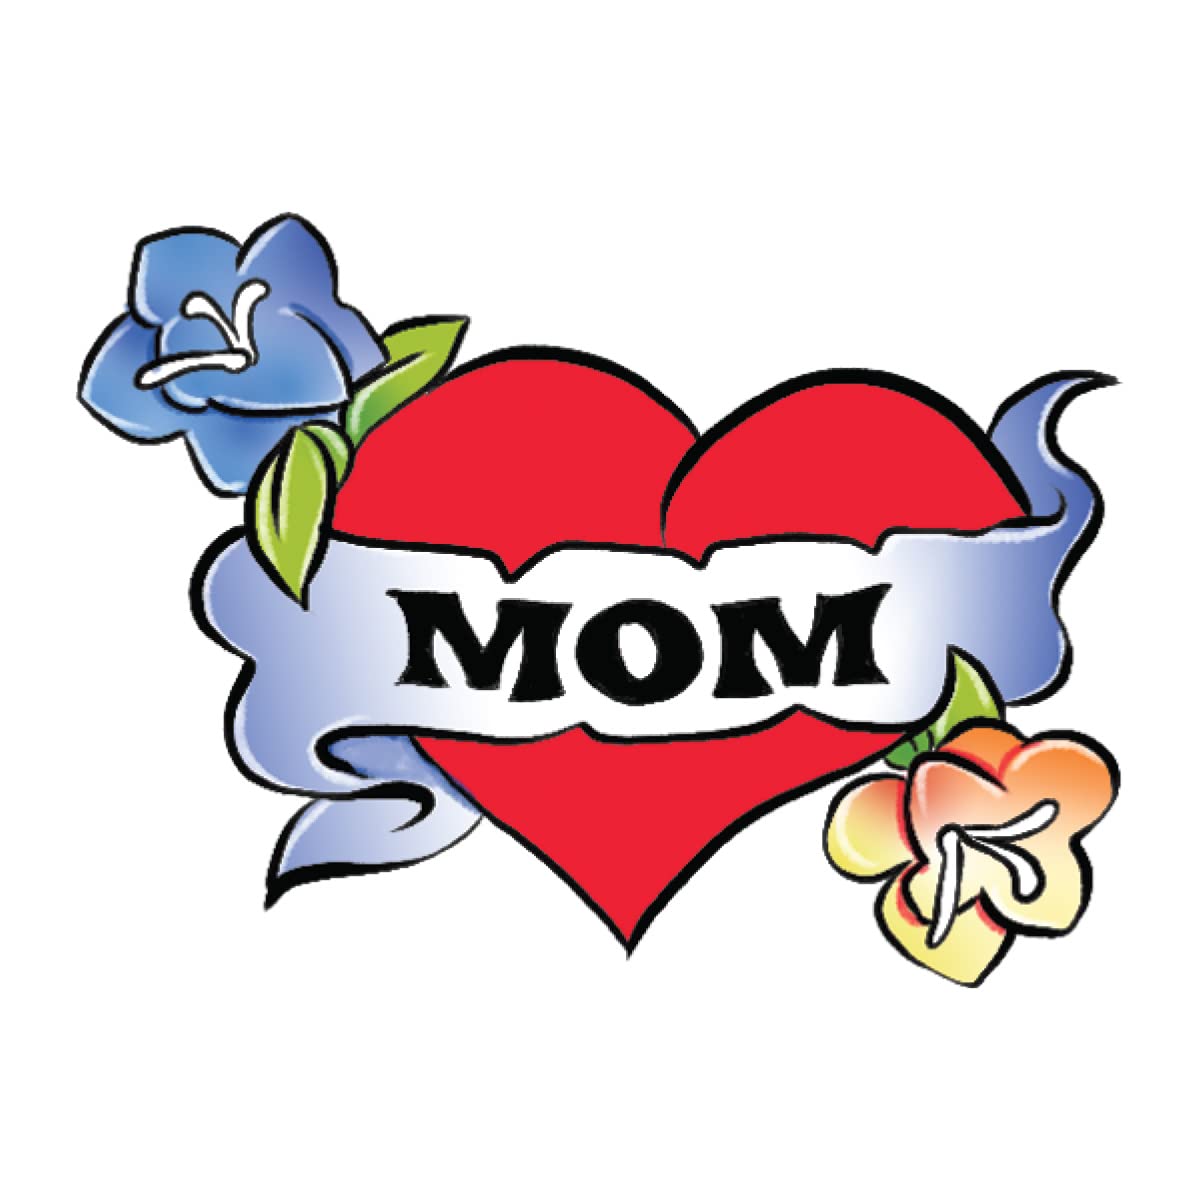 Mom Heart & Flowers Temporary Tattoos | 10 Pack | Skin Safe | MADE IN THE USA | Removable